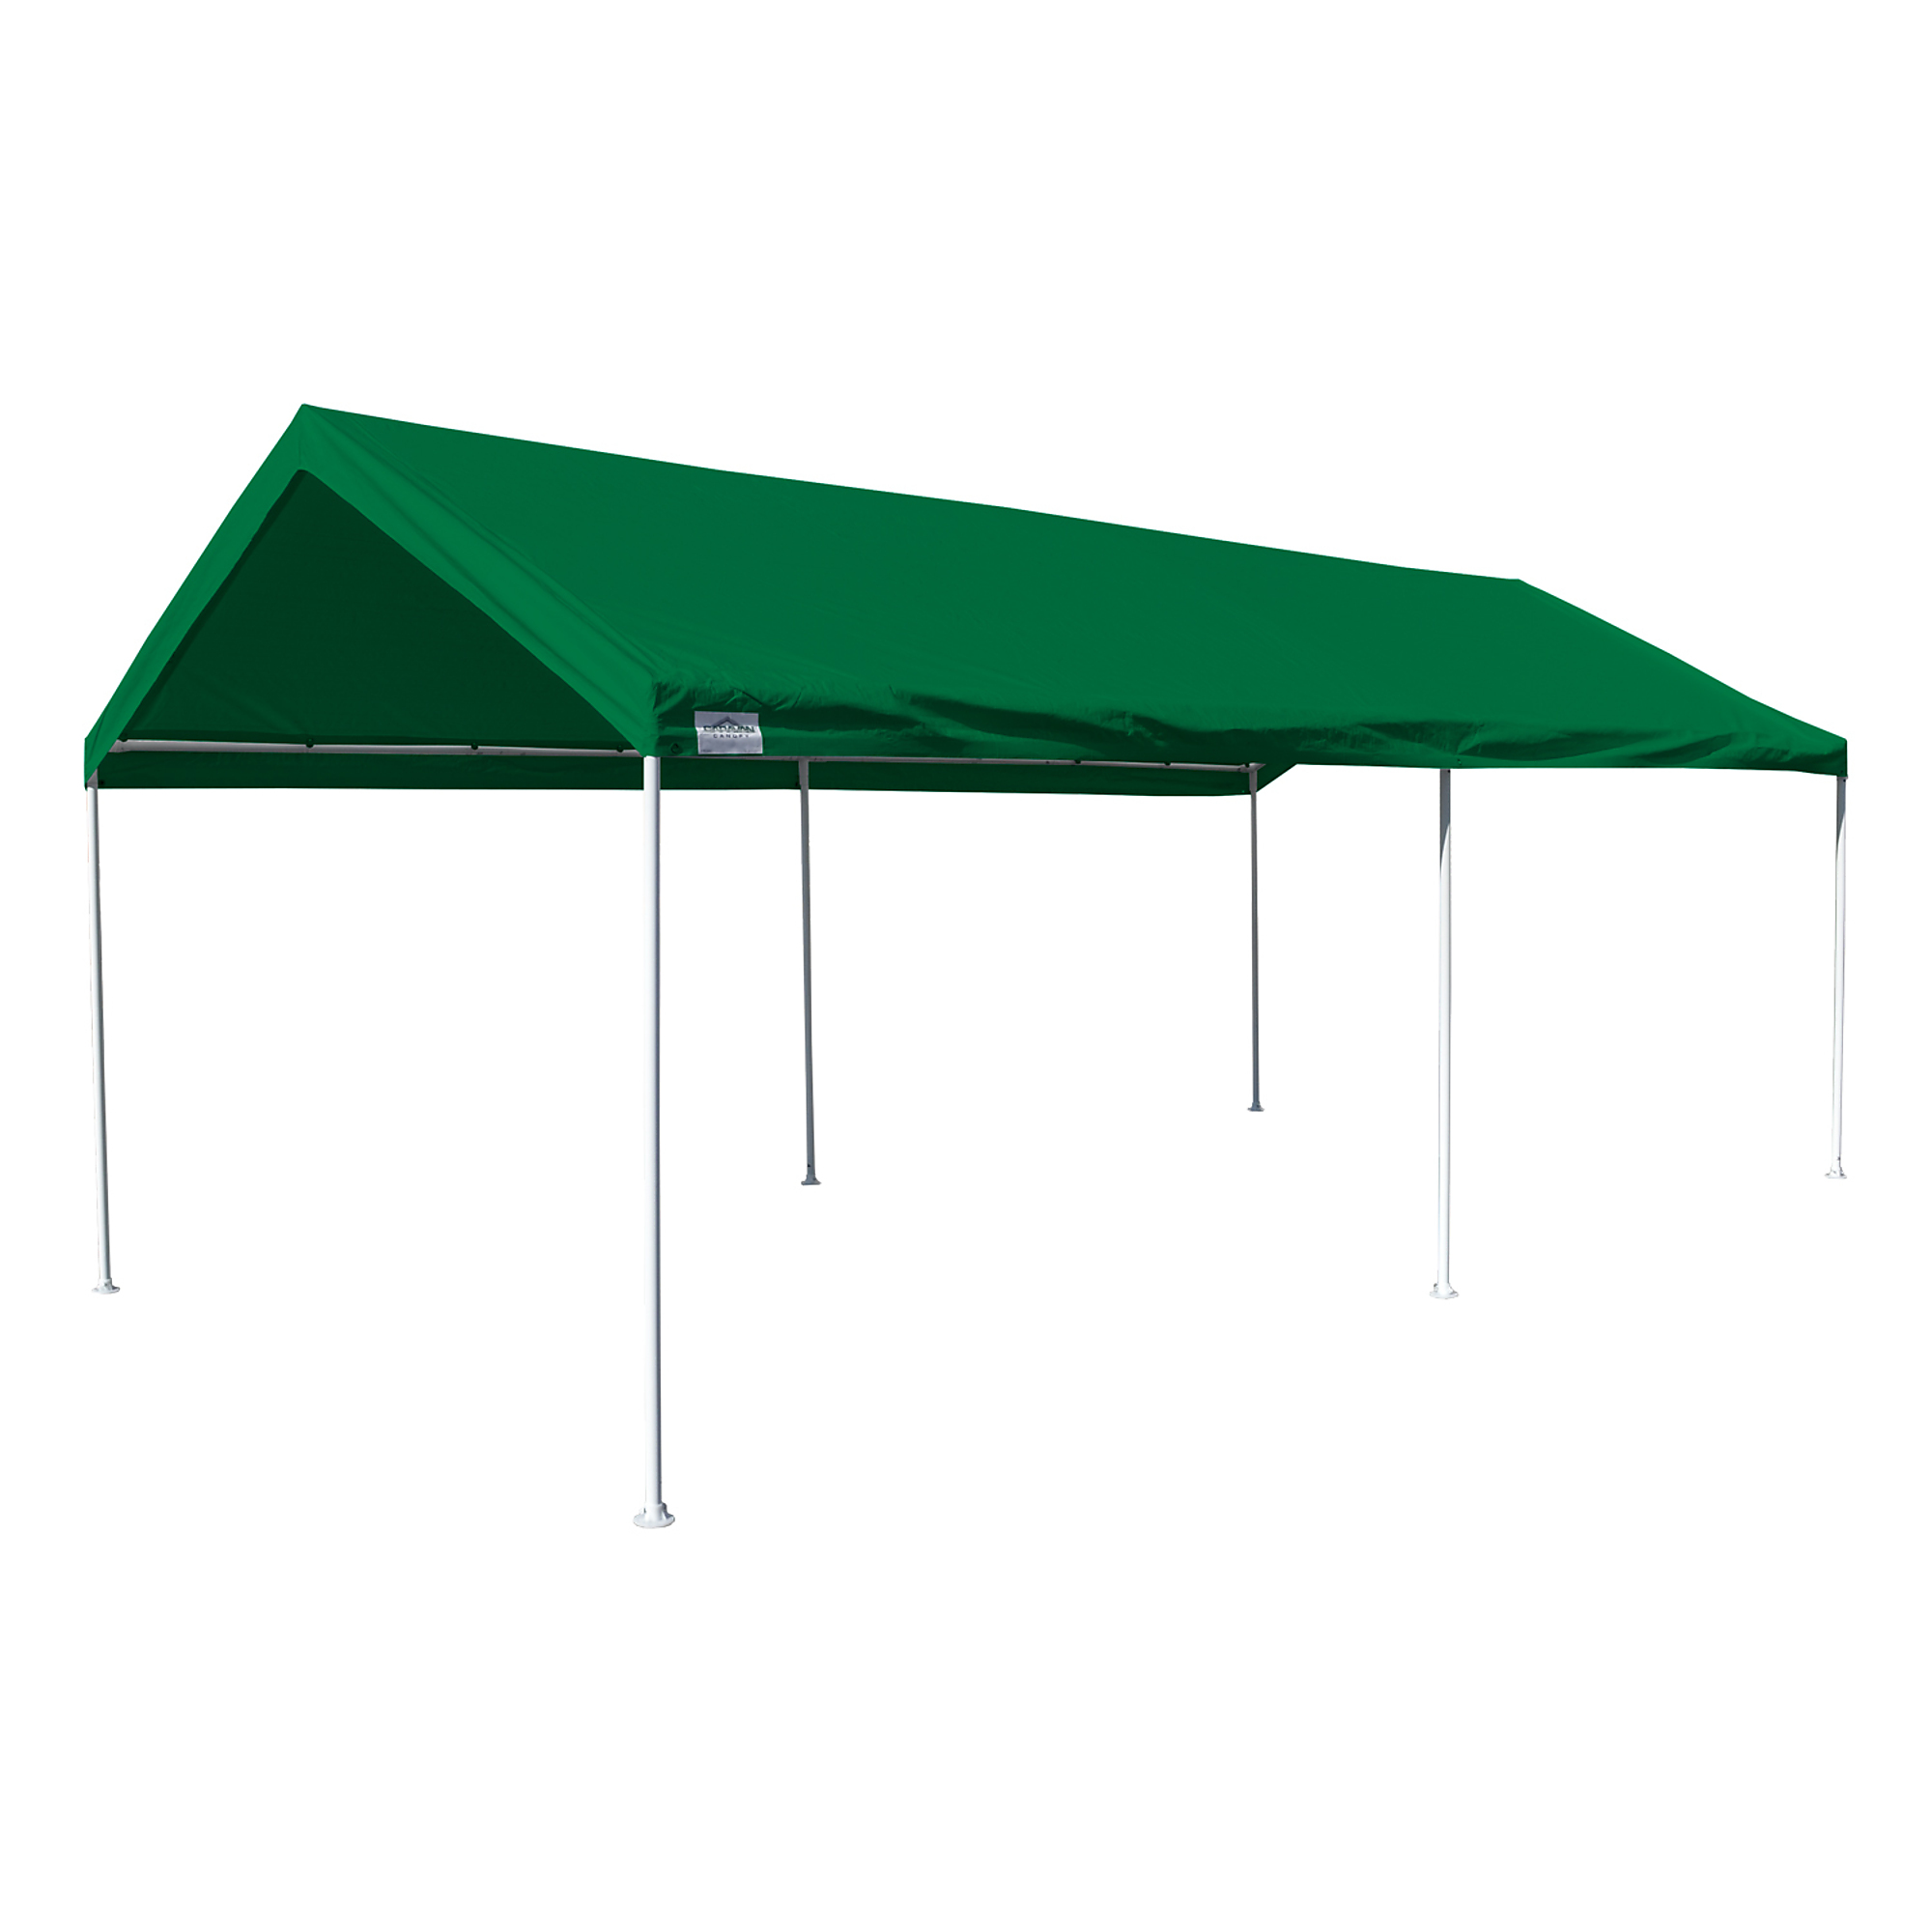 Caravan Canopy, Forest Green Domain kit, Width 120 in, Height 70.8 in, Cover Material Polyethylene, Model 22006200070